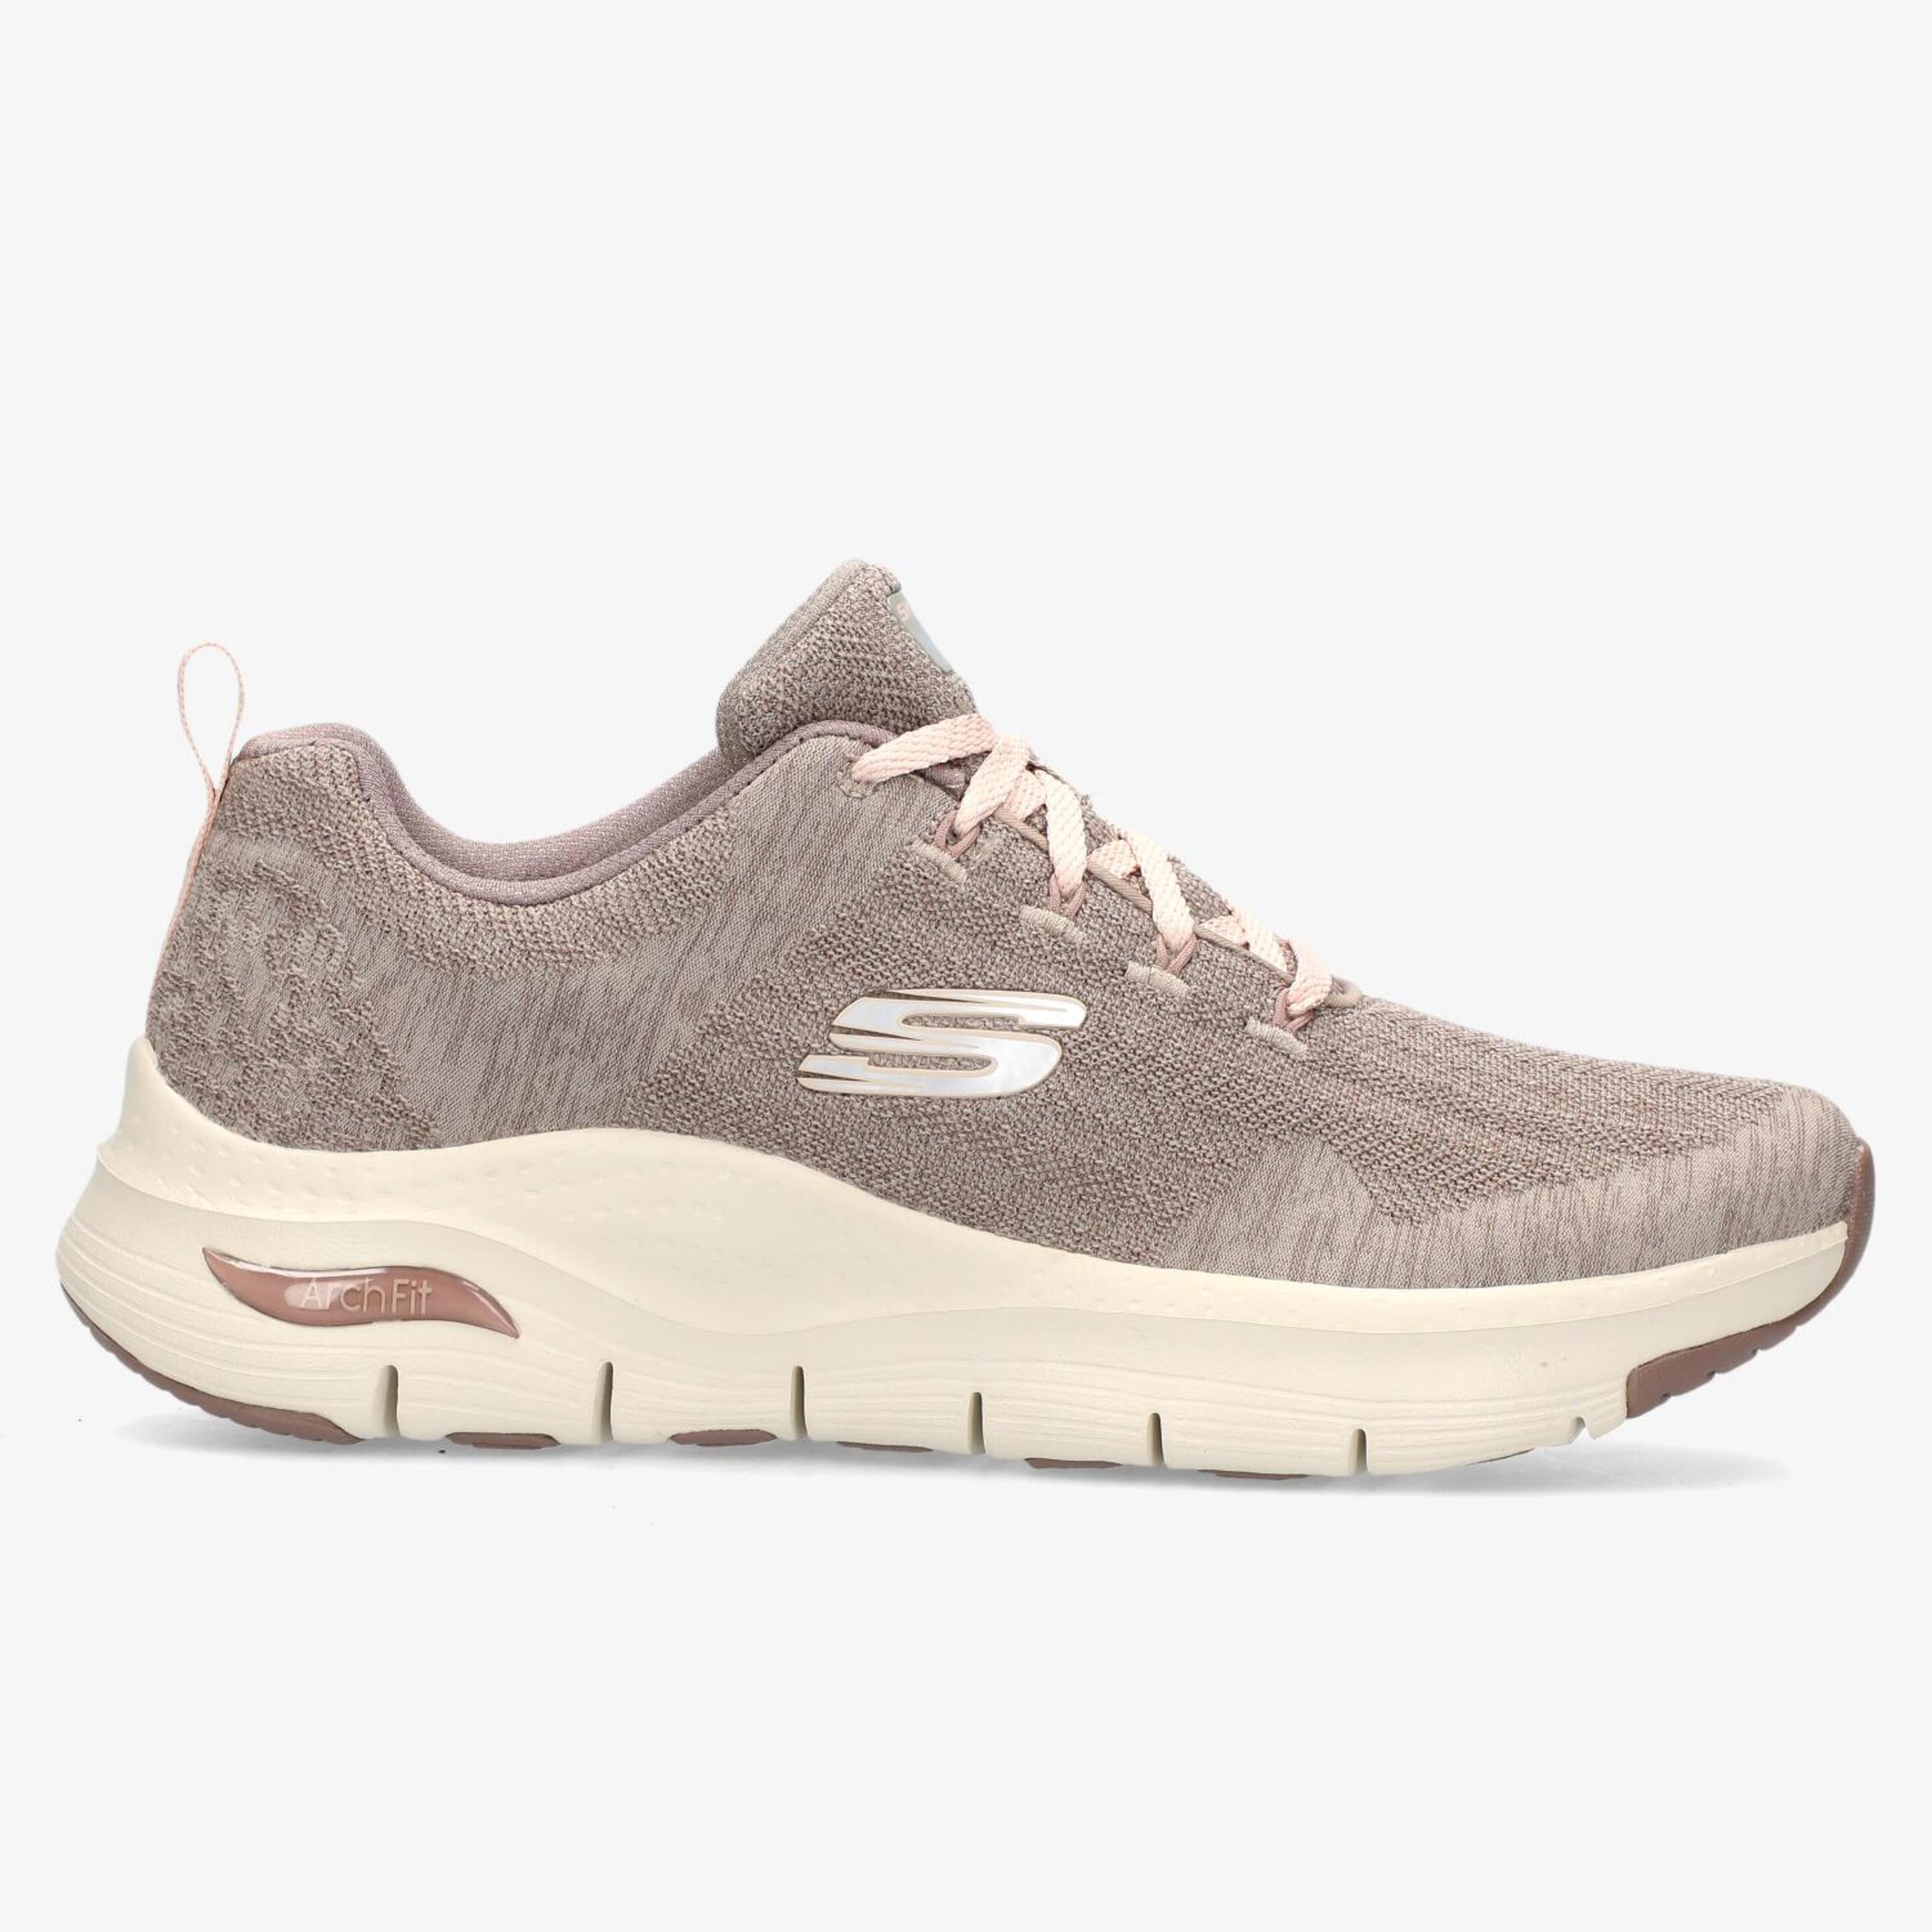 Skechers Arch Fit - marron - Sapatilhas Running Mulher